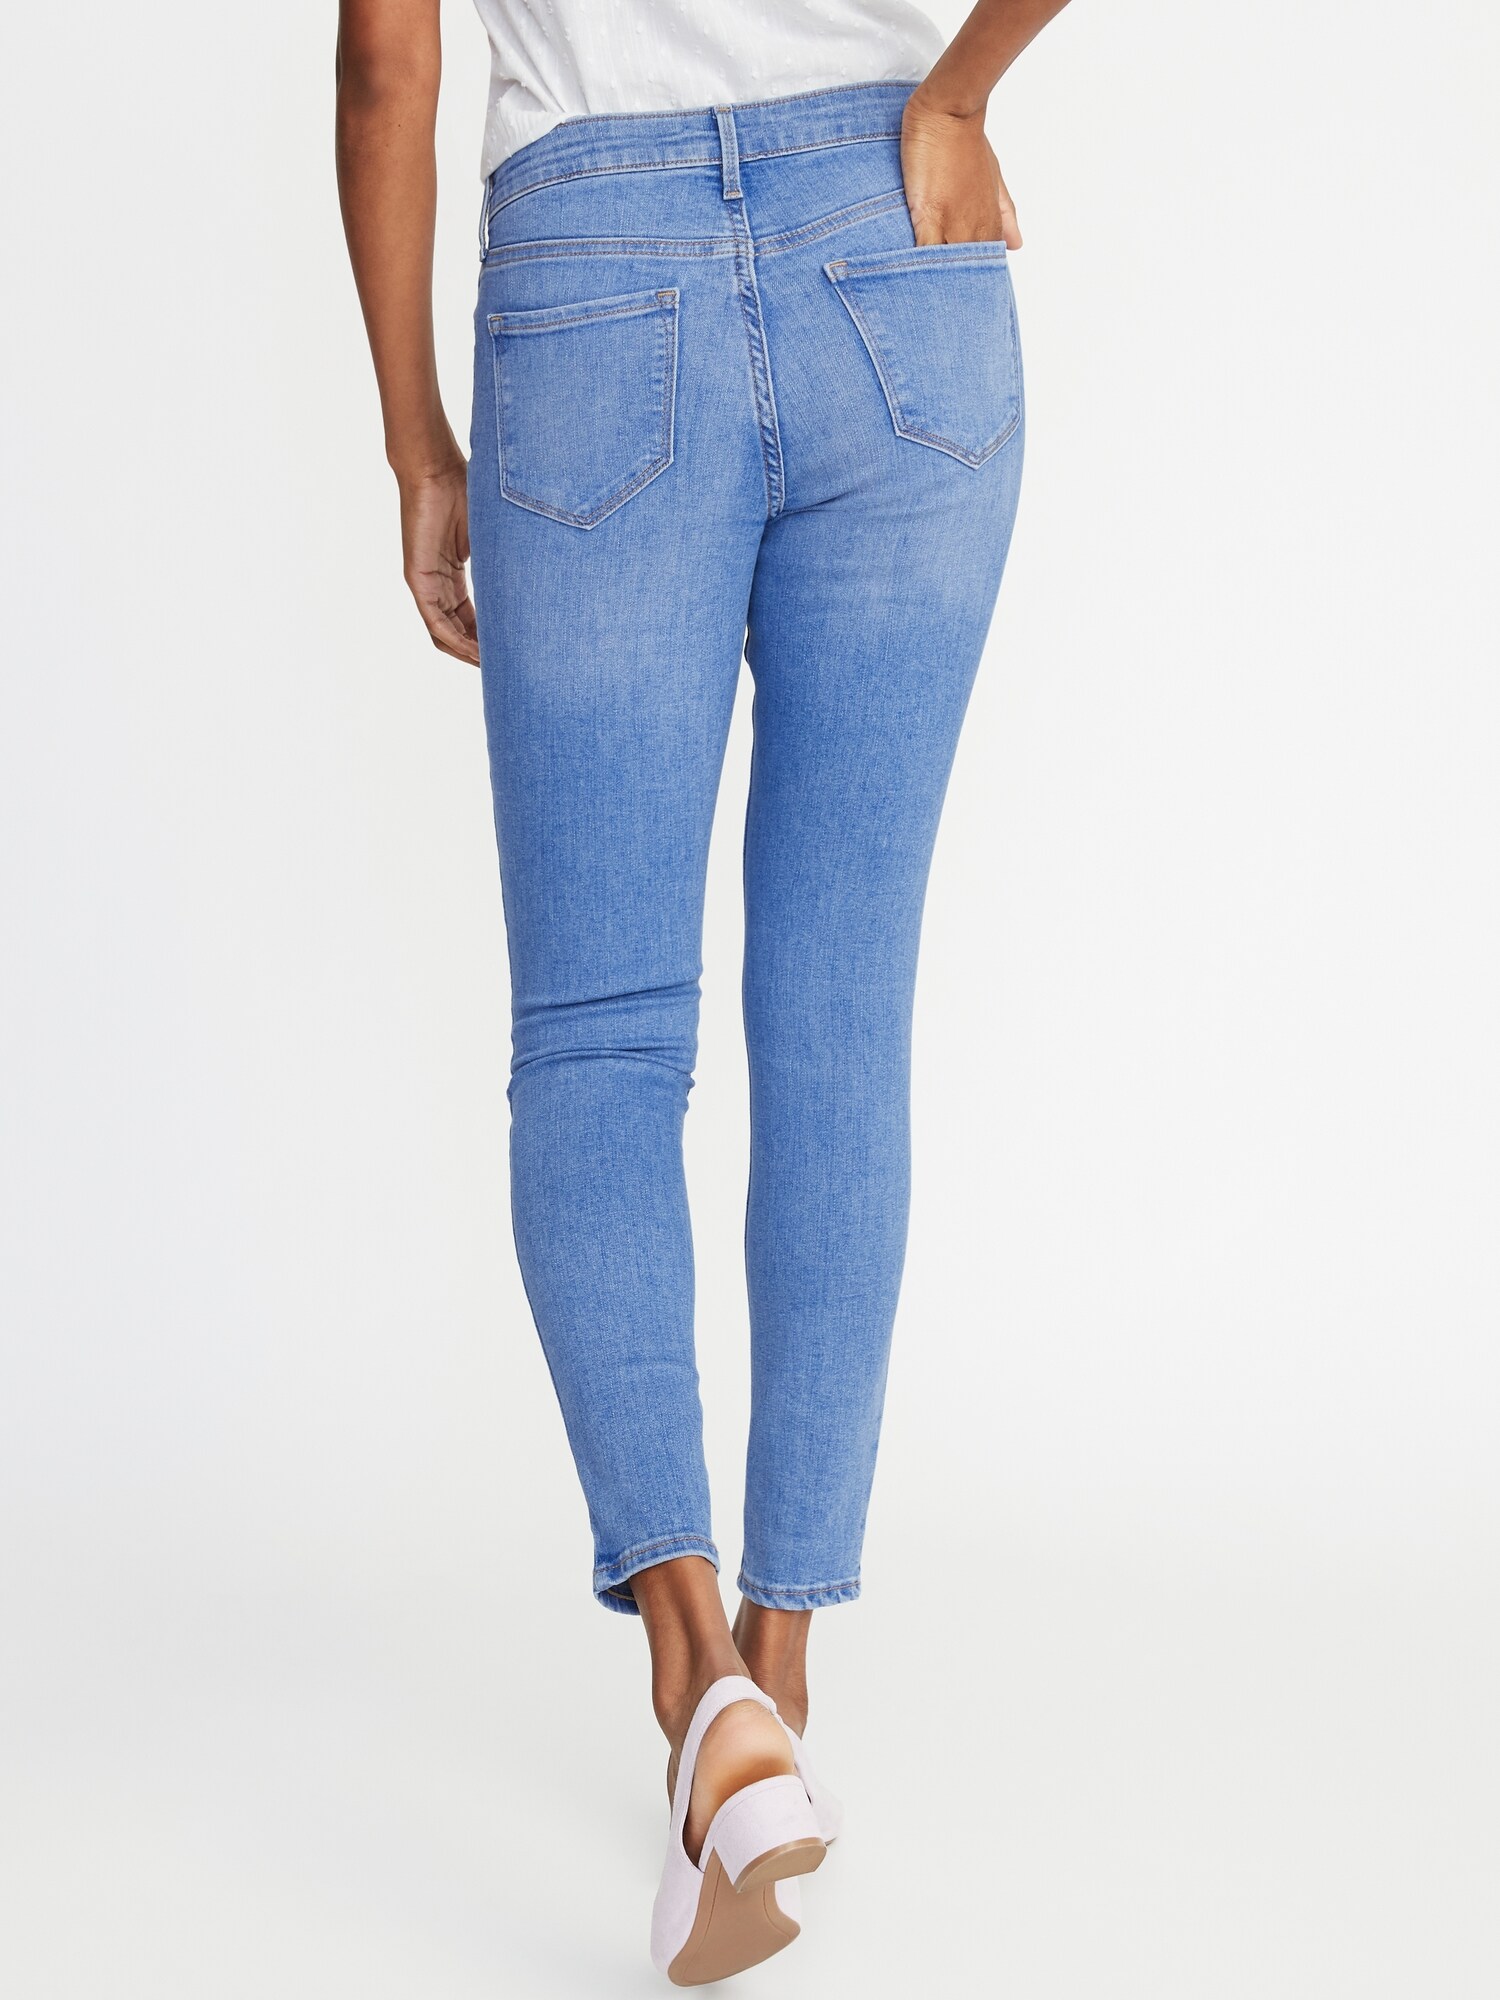 old navy jeans for curvy